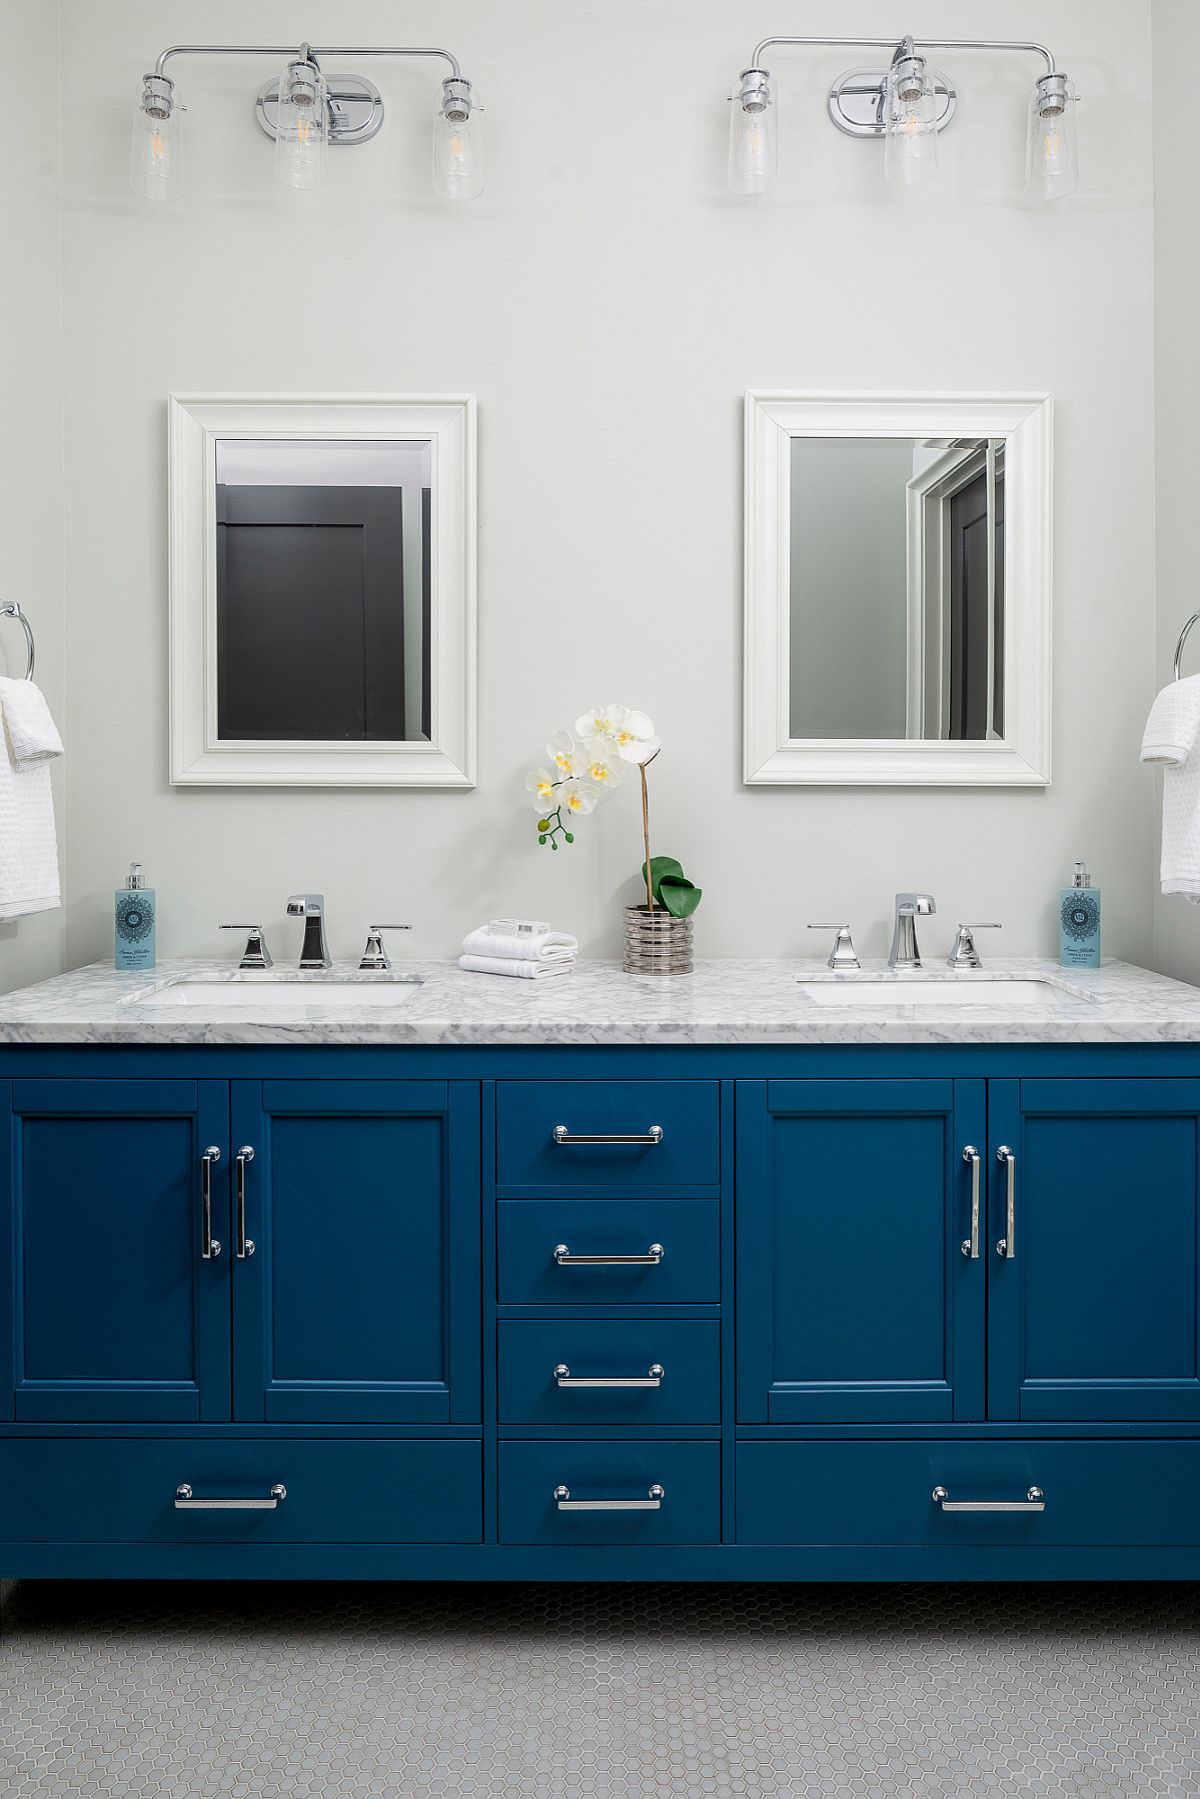 Modern style sink vanity and stain resistant